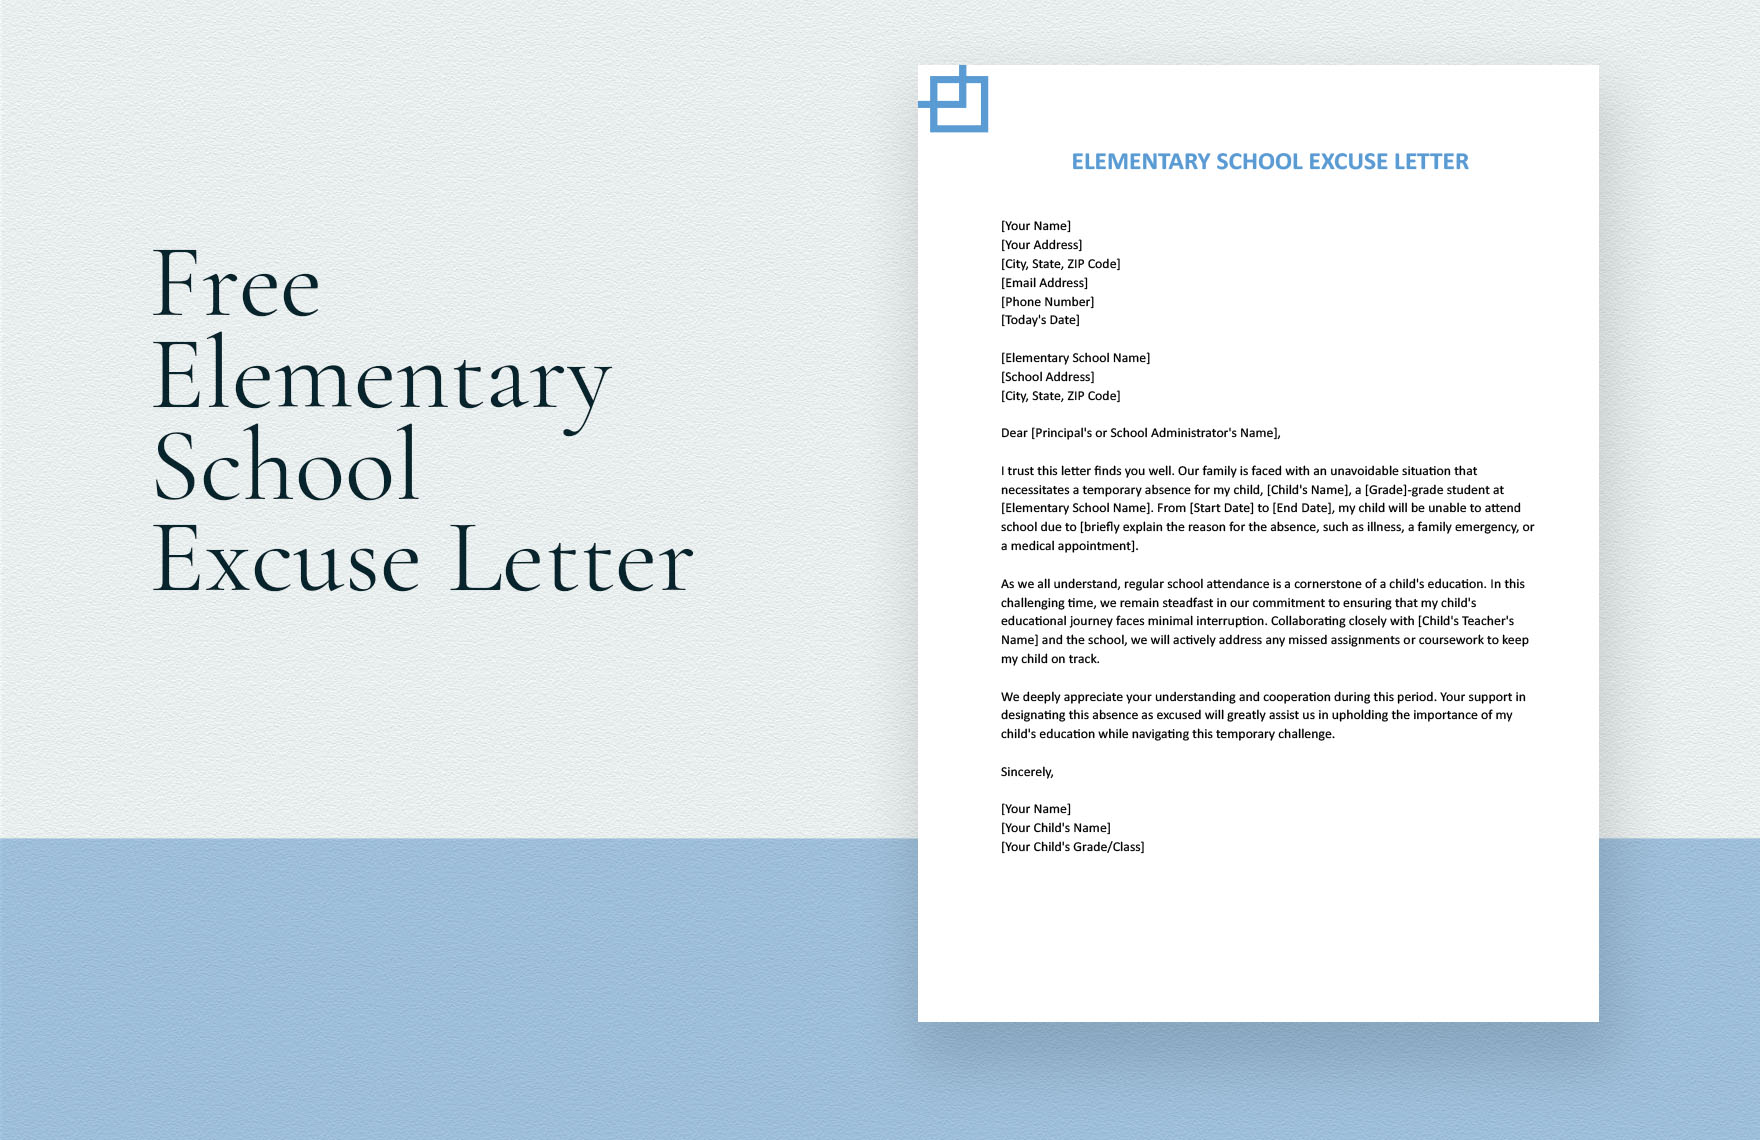 Elementary School Excuse Letter